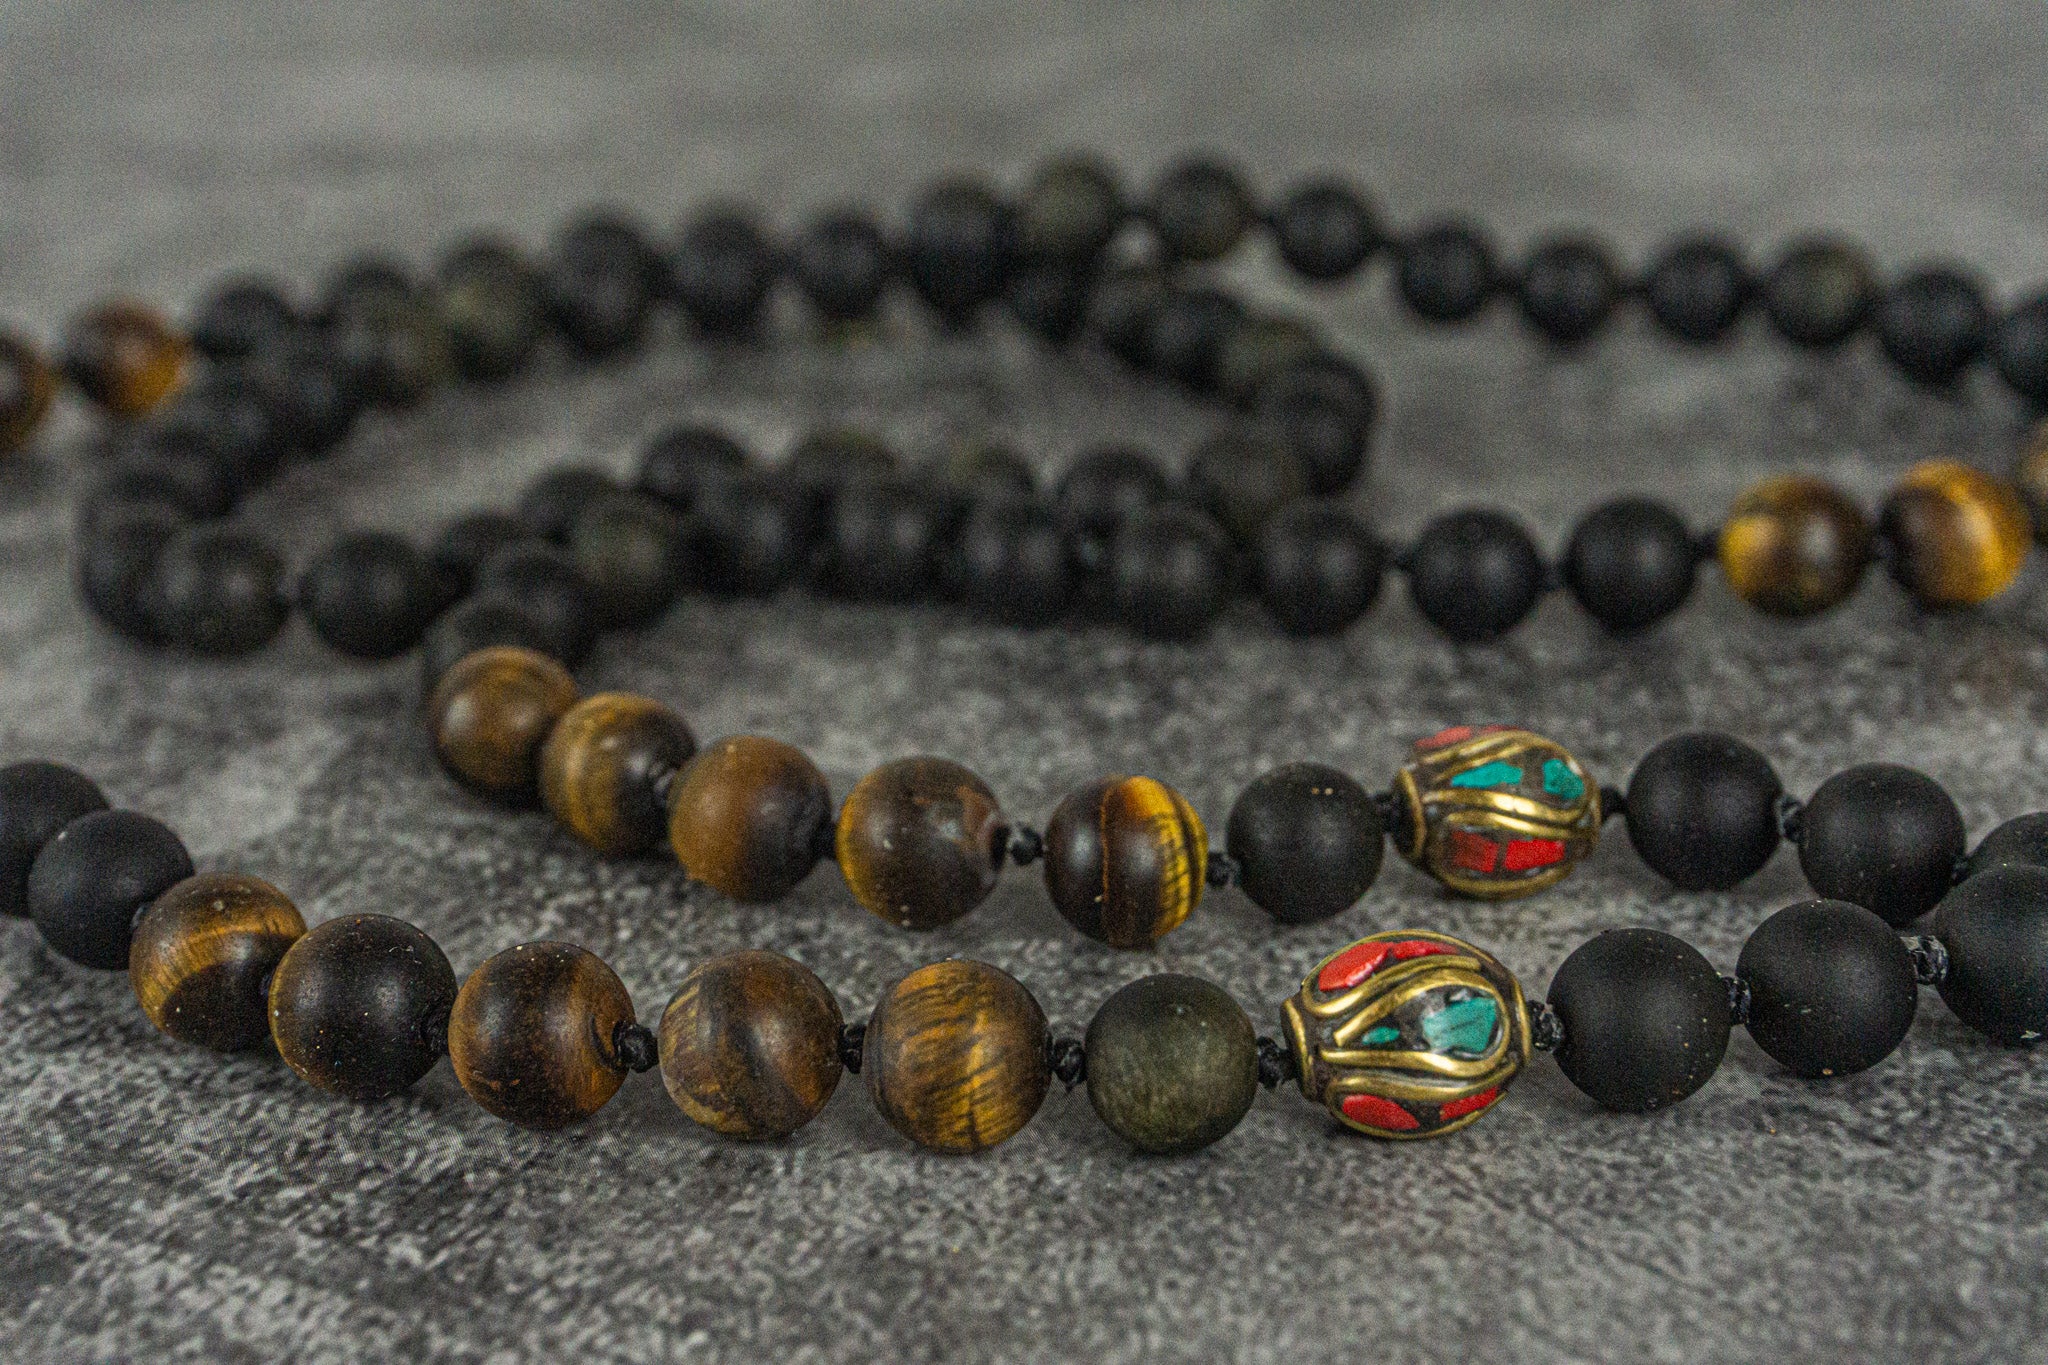 necklace made of golden obsidian and frosted tiger eye gemstones, with tibetan beads decorations- wander jewellery